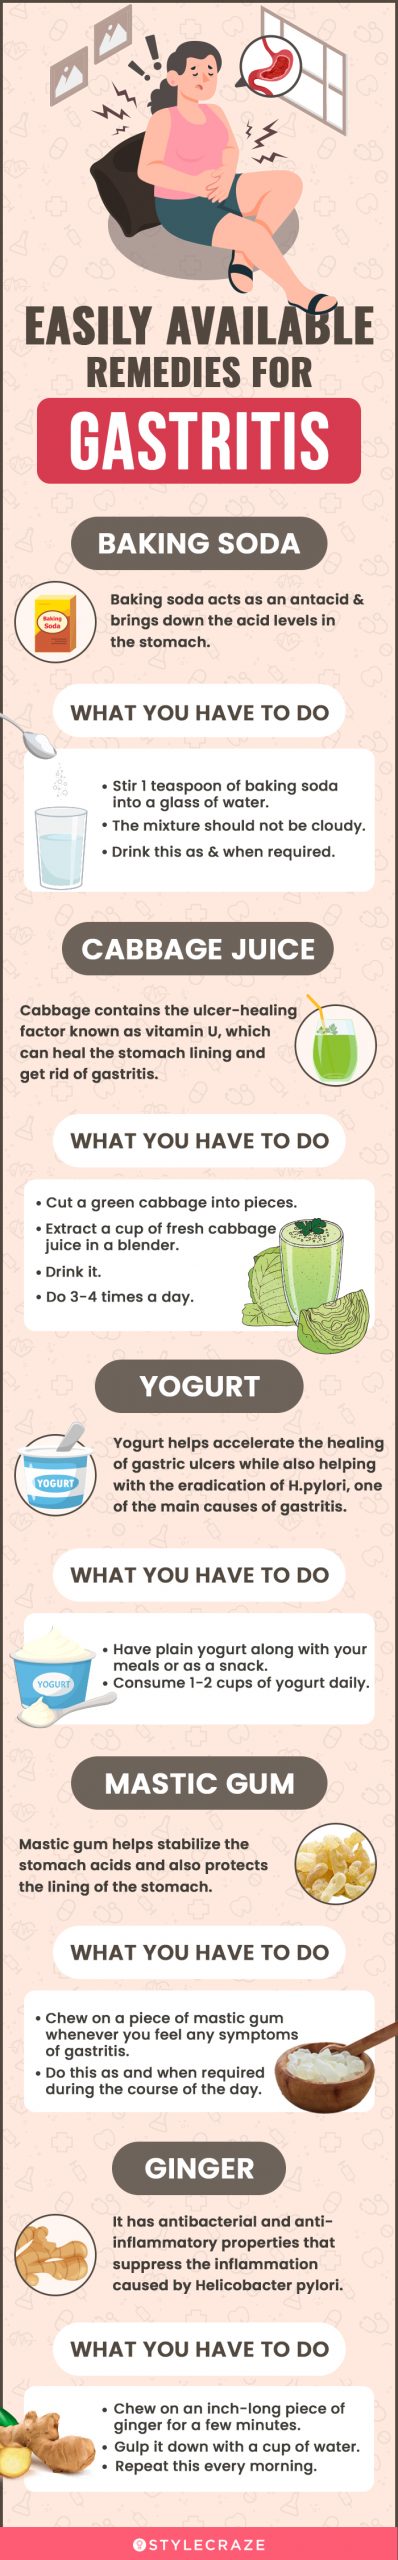 easily available remedies for gastritis (infographic)